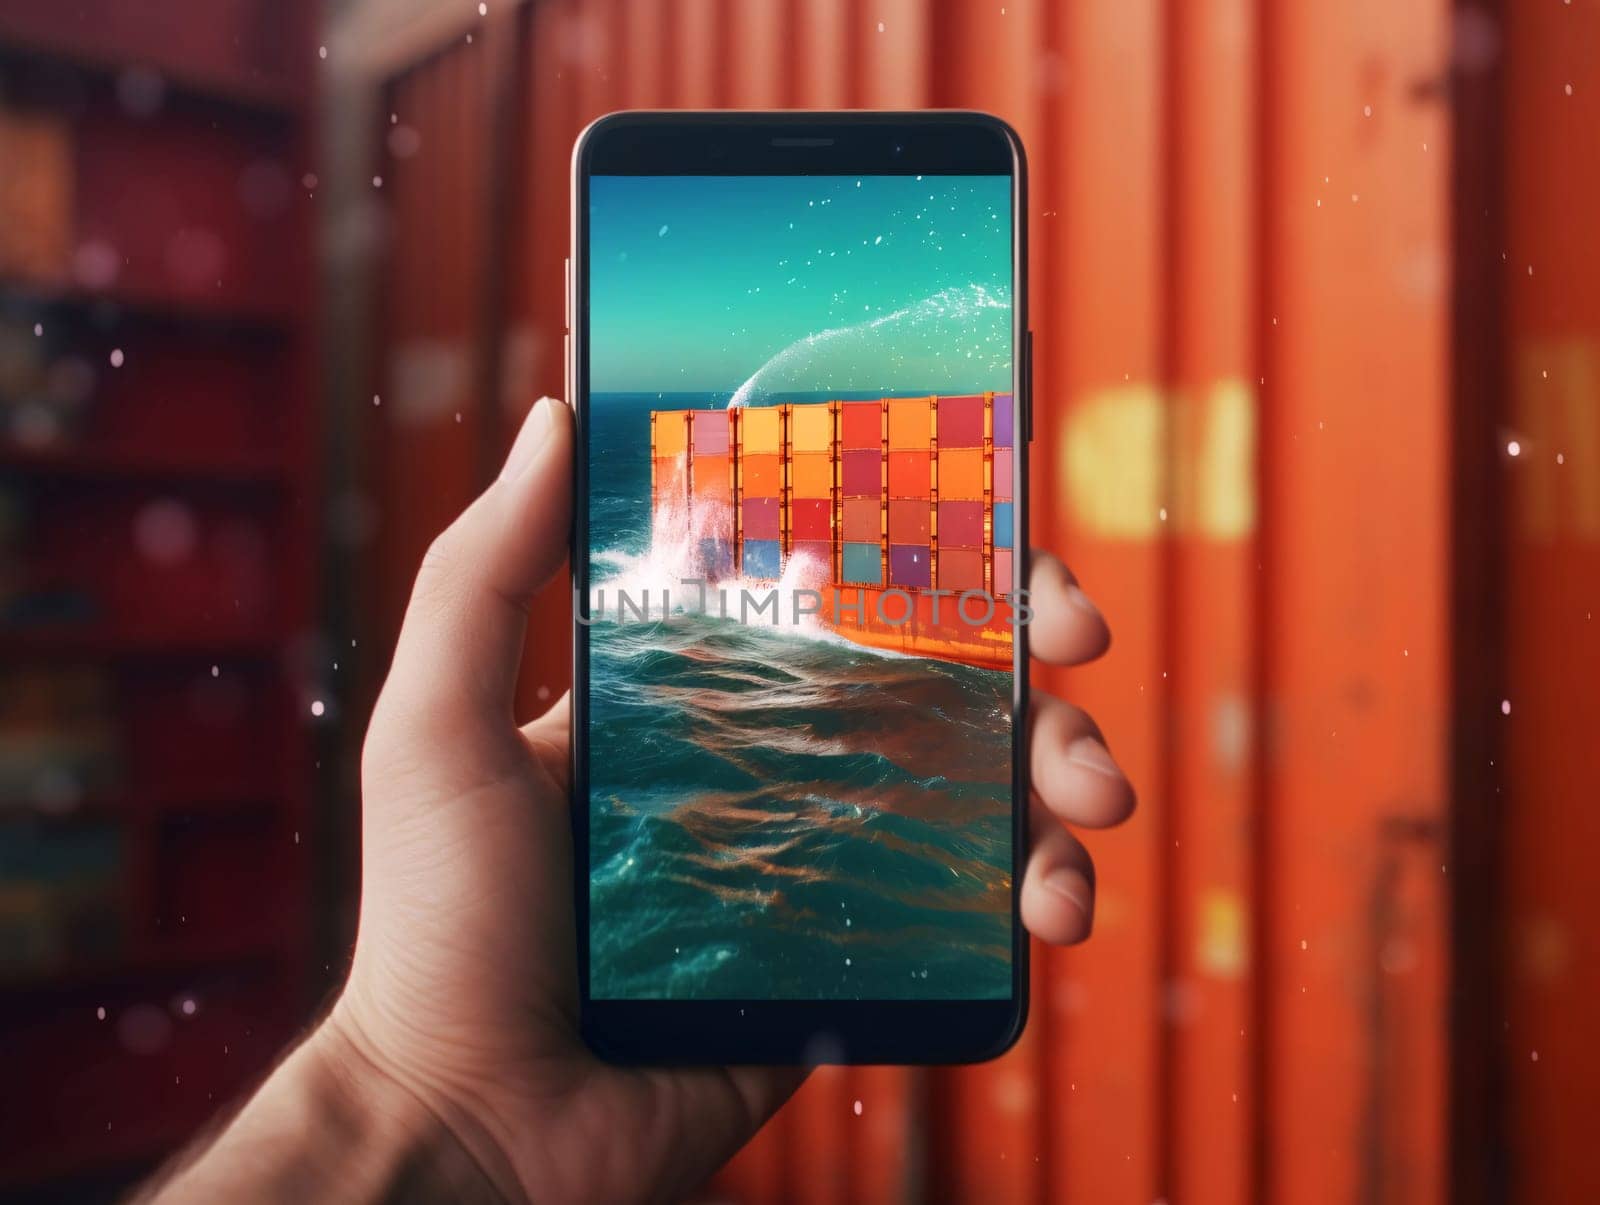 Smartphone screen: Smartphone in hand with container cargo freight ship in the background.